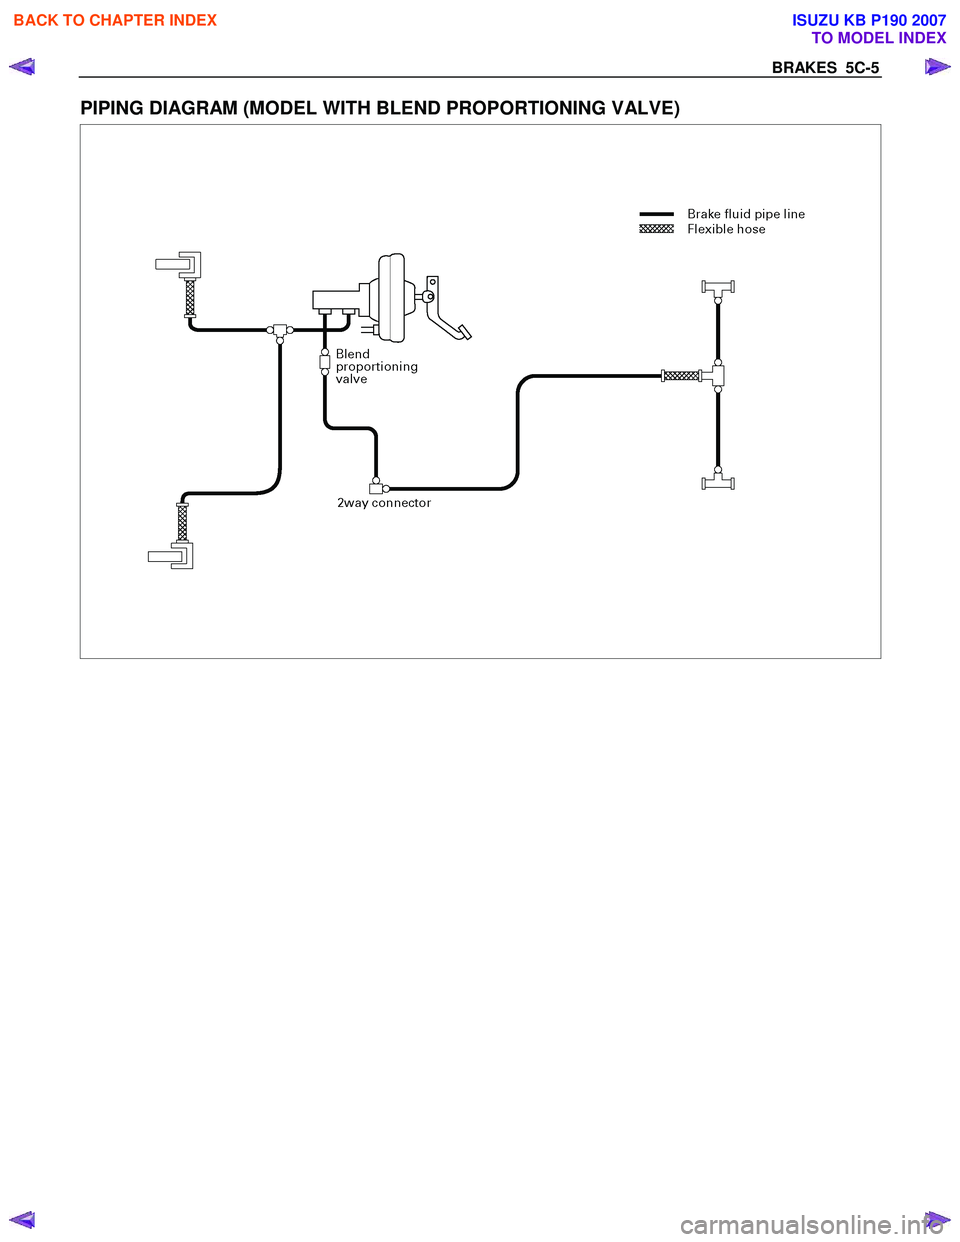 ISUZU KB P190 2007  Workshop Repair Manual BRAKES  5C-5 
PIPING DIAGRAM (MODEL WITH BLEND PROPORTIONING VALVE) 
 
 
 
BACK TO CHAPTER INDEX
TO MODEL INDEX
ISUZU KB P190 2007 